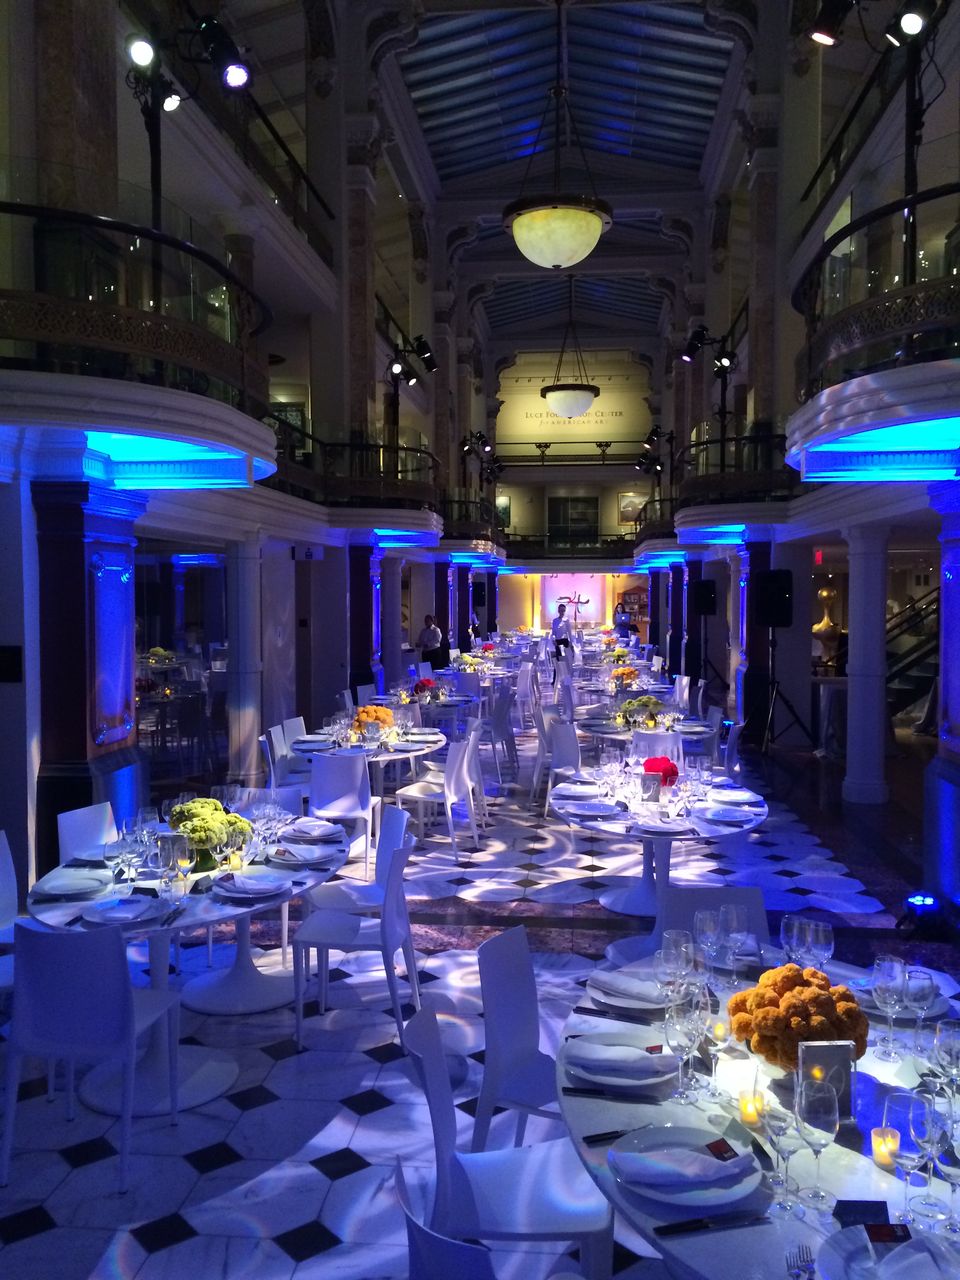 An image inside the Luce Foundation Center during a special event.